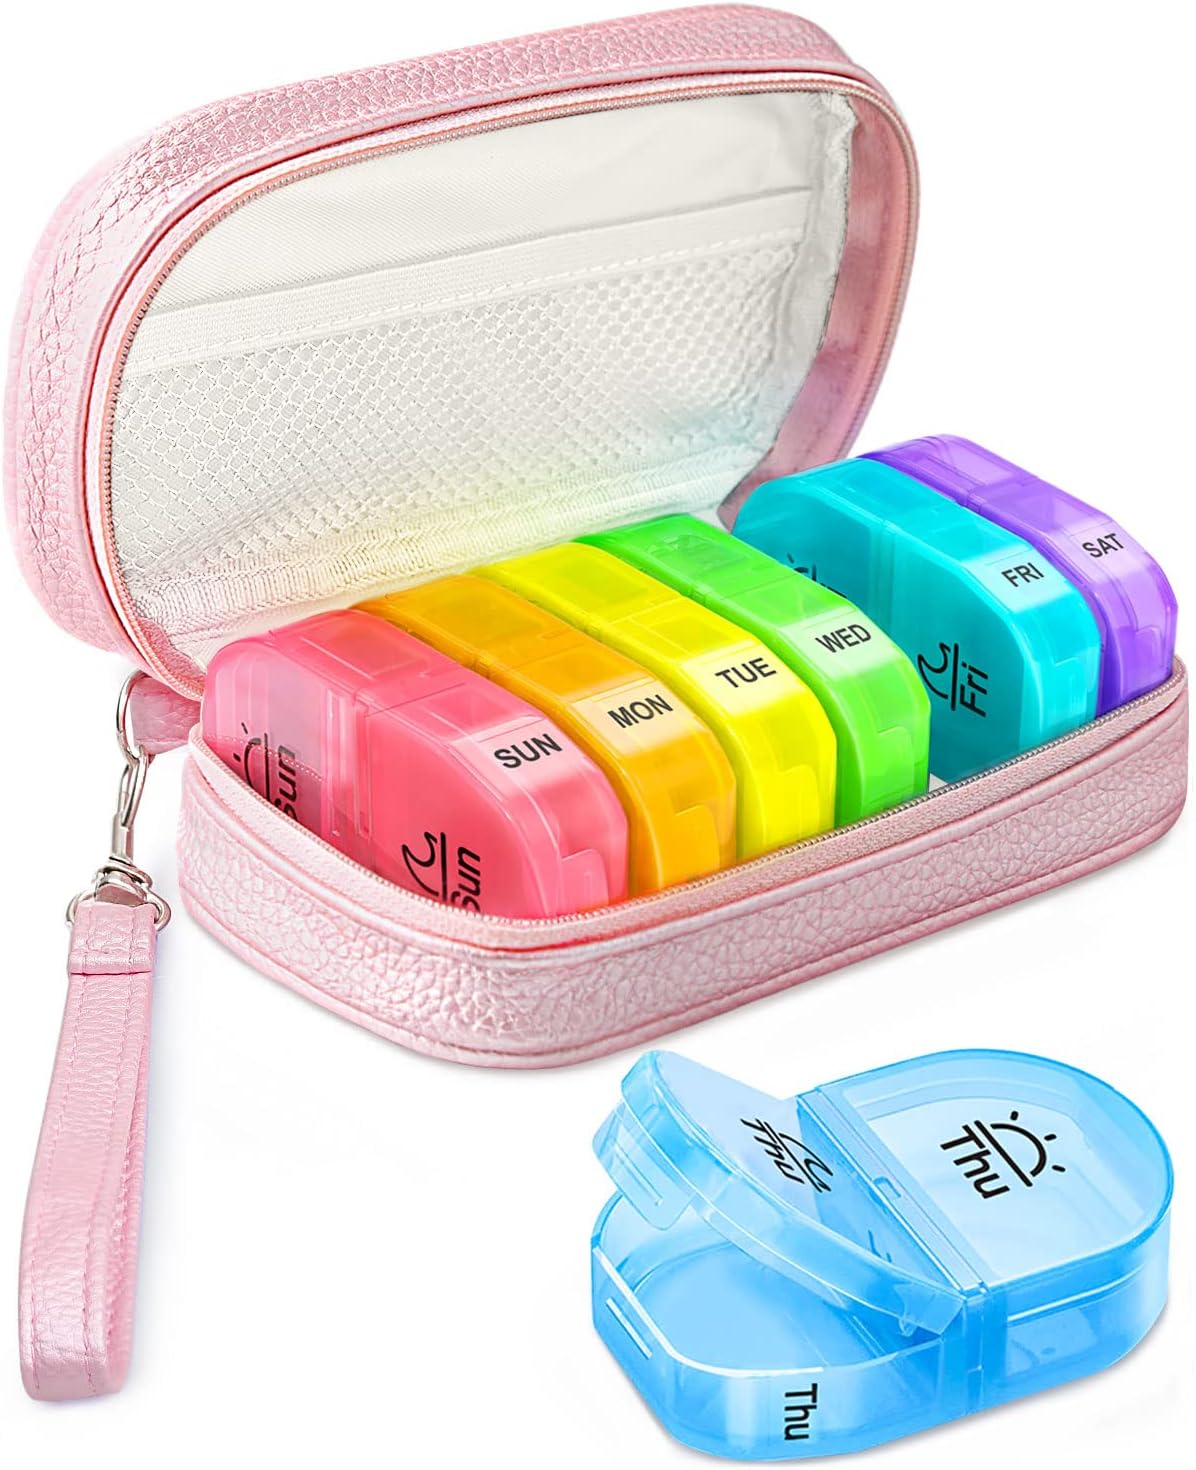 Pink fake leather pouch with a zipper and wrist strap. The pouch holds seven individual plastic pill containers — all different colors — that are labeled for each day of the week and divided into morning and night doses. The pouch also has an interior mesh pocket.